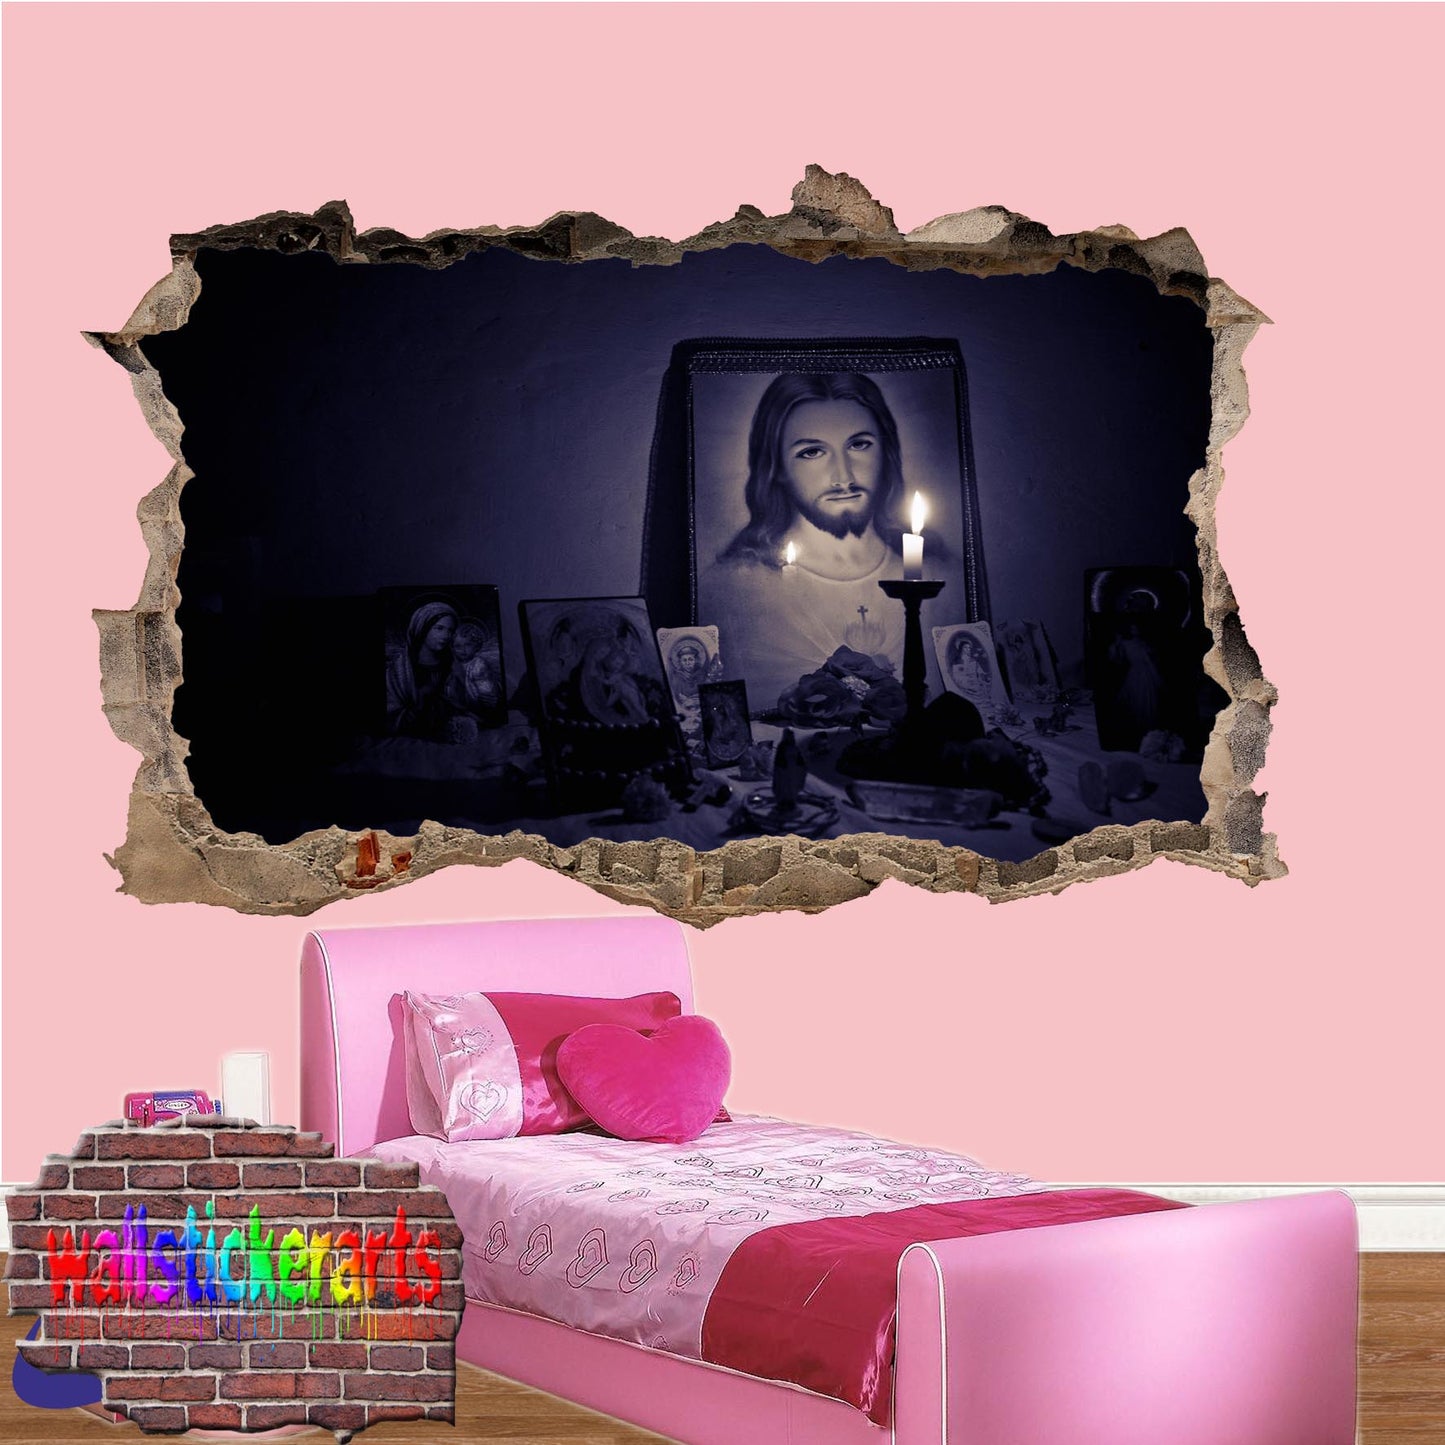 Christianity Christian Jesus 3d Art Smashed Effect Wall Sticker Room Office Nursery Shop Decoration Decal Mural